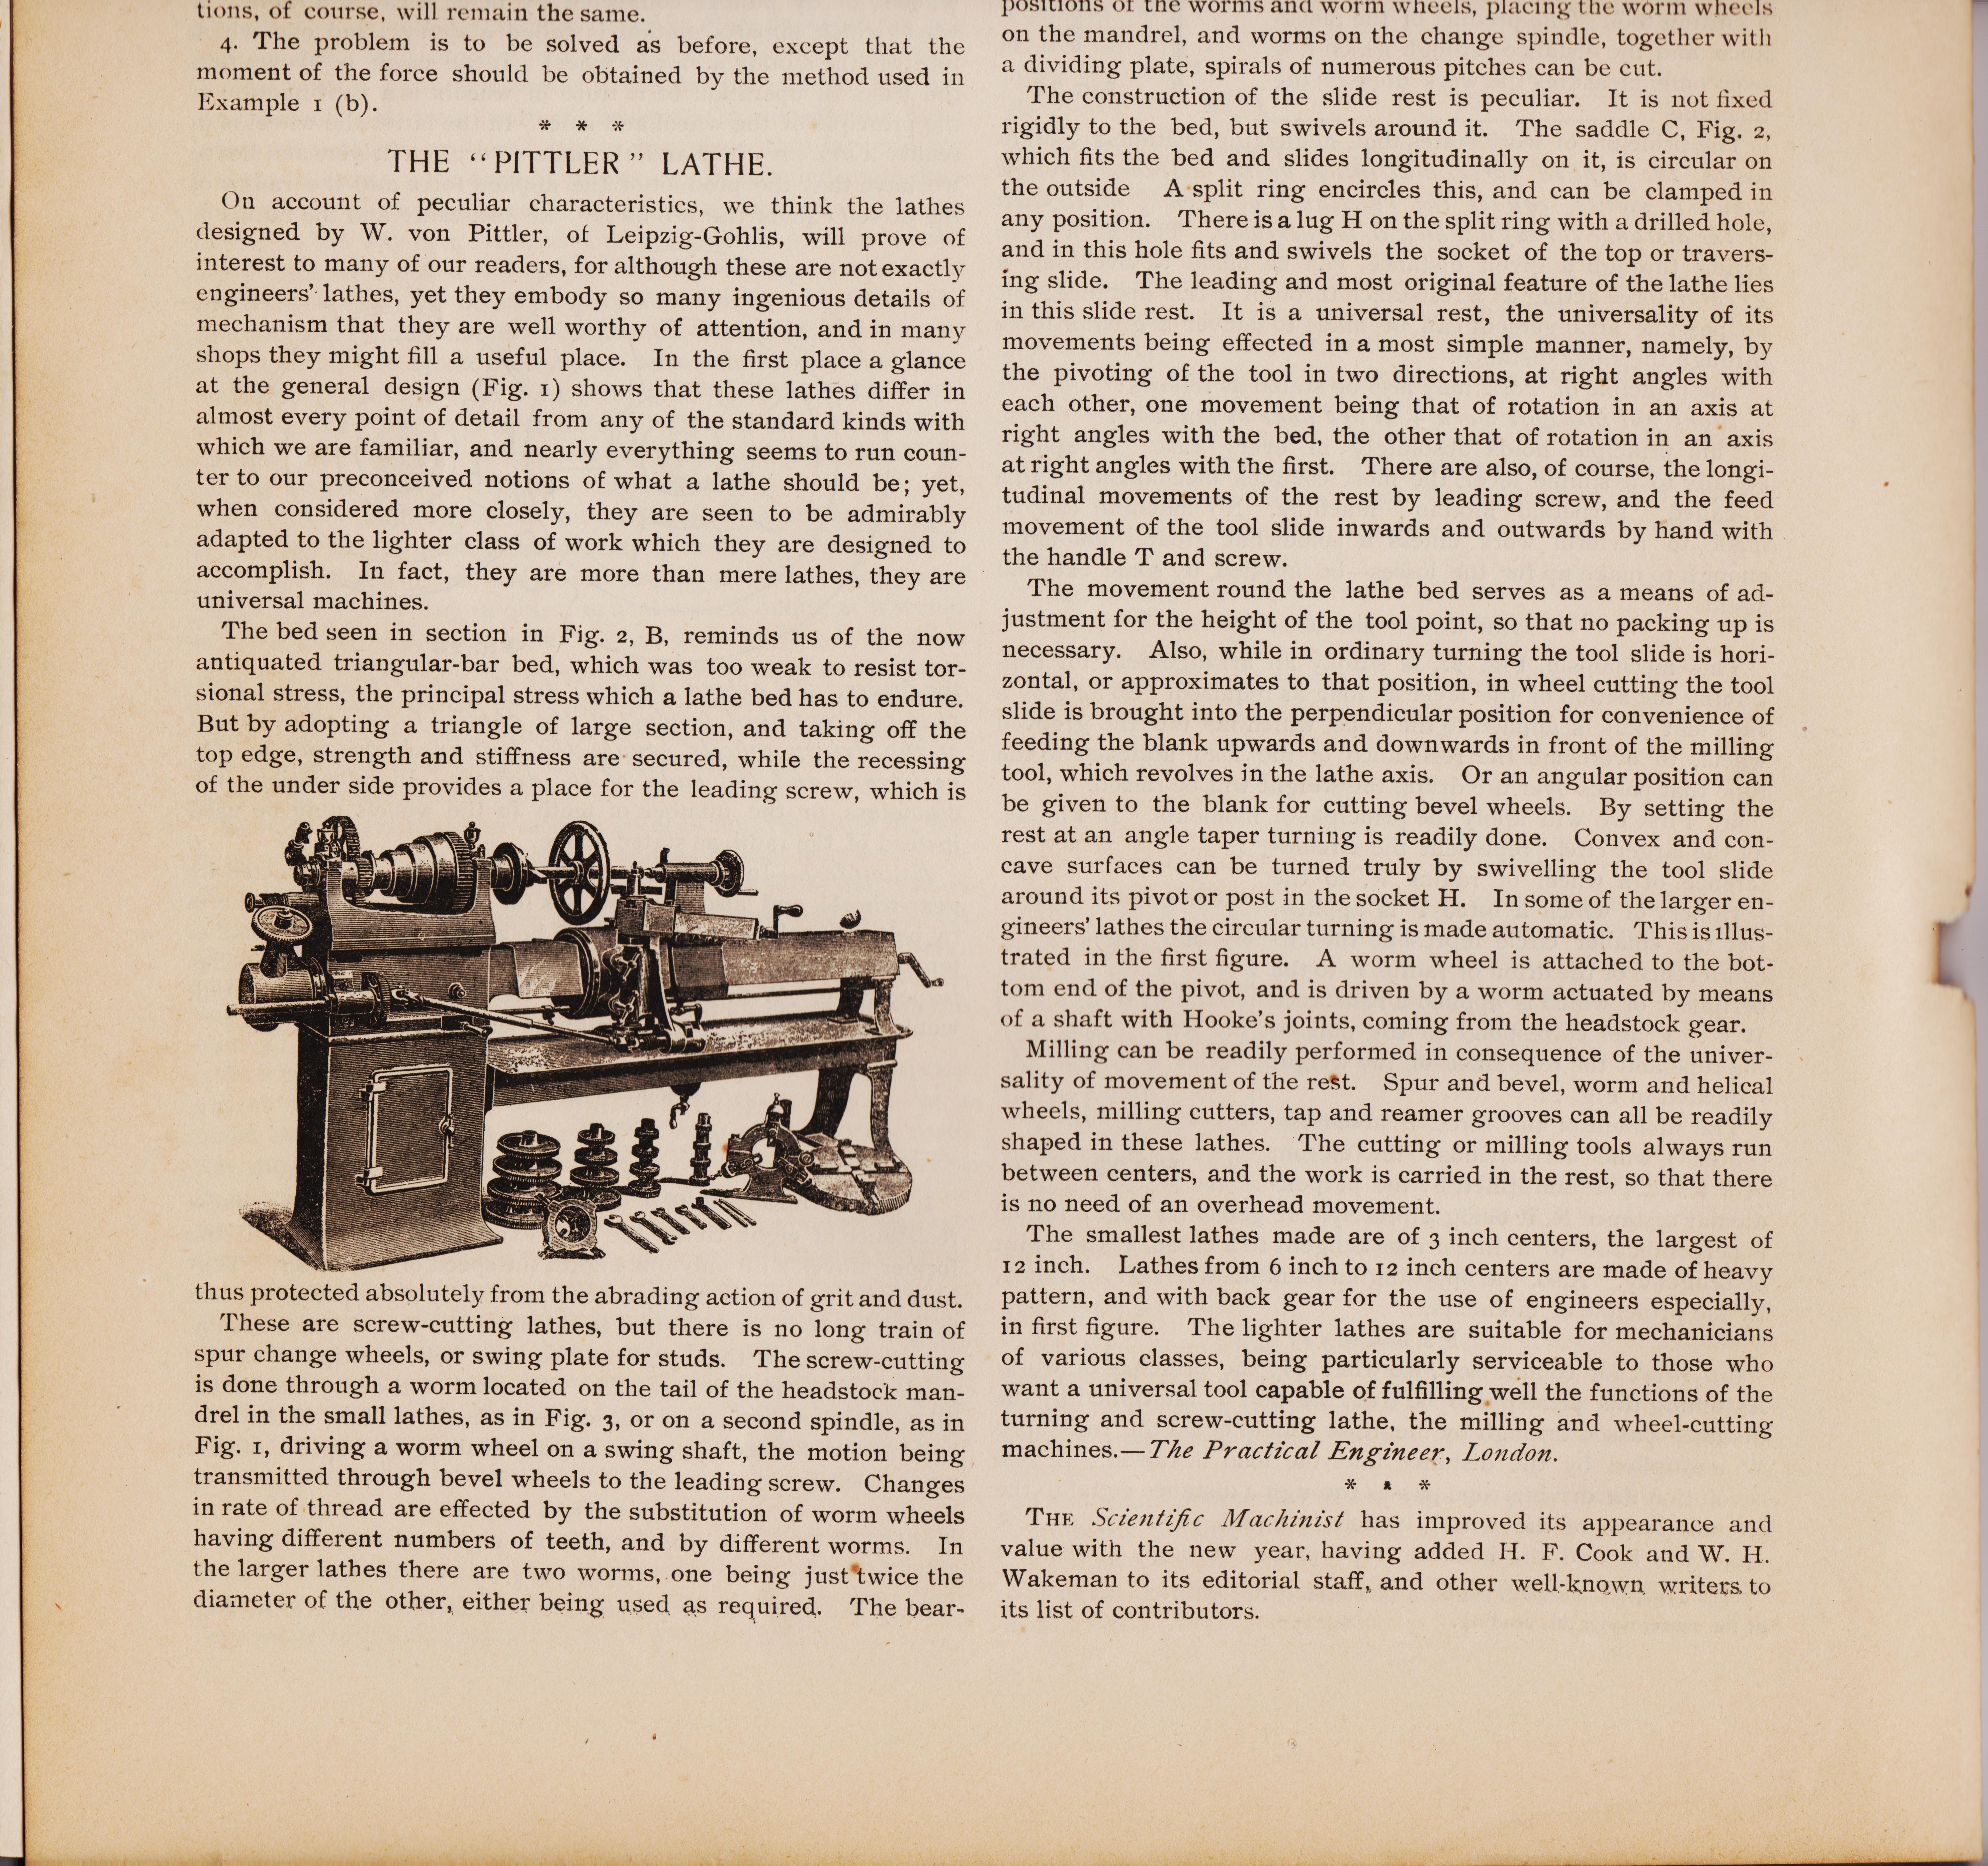 http://antiquemachinery.com/images-2020/Machinery-Magazine-March-1896-vol-2-no-7-page-208-bot.jpg